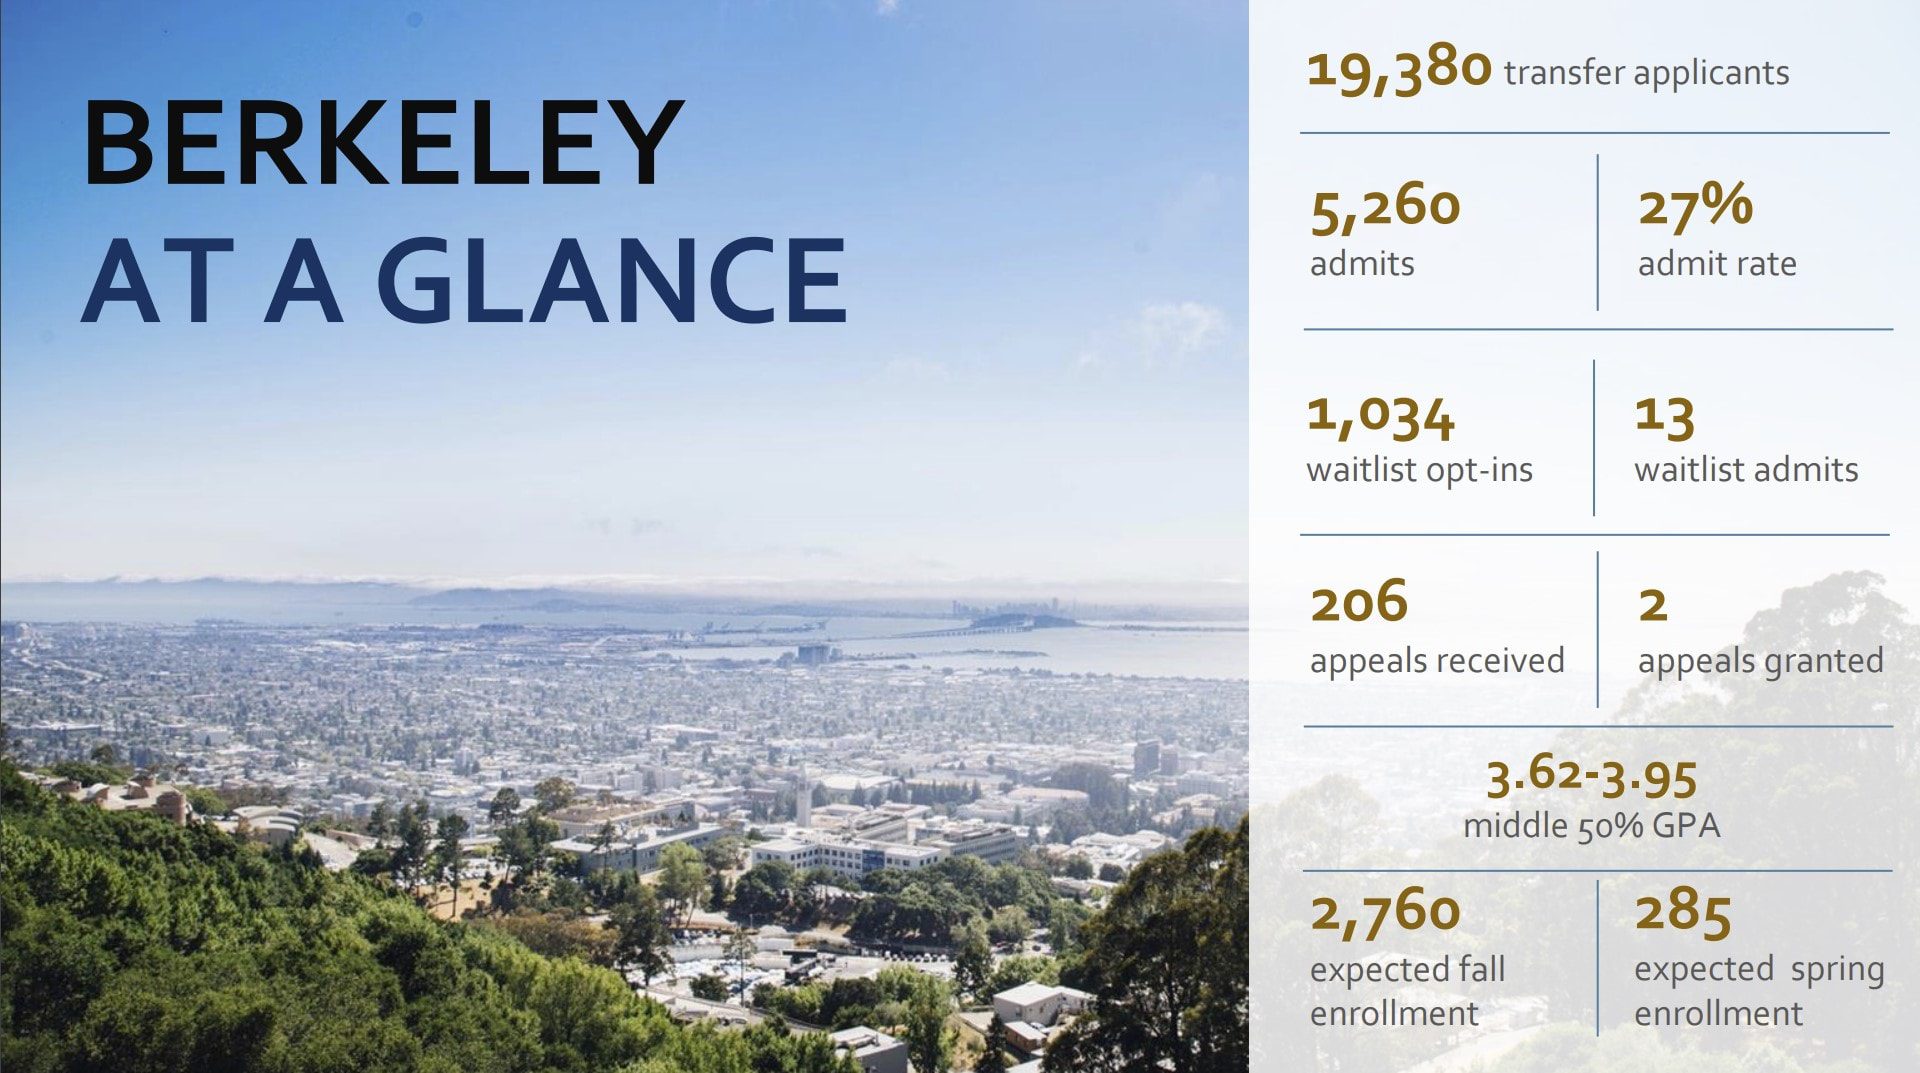 UC Berkeley - One of the best colleges in the nation and is a world-renowned school. Highly ranked and has direct mission and active alumni workforce